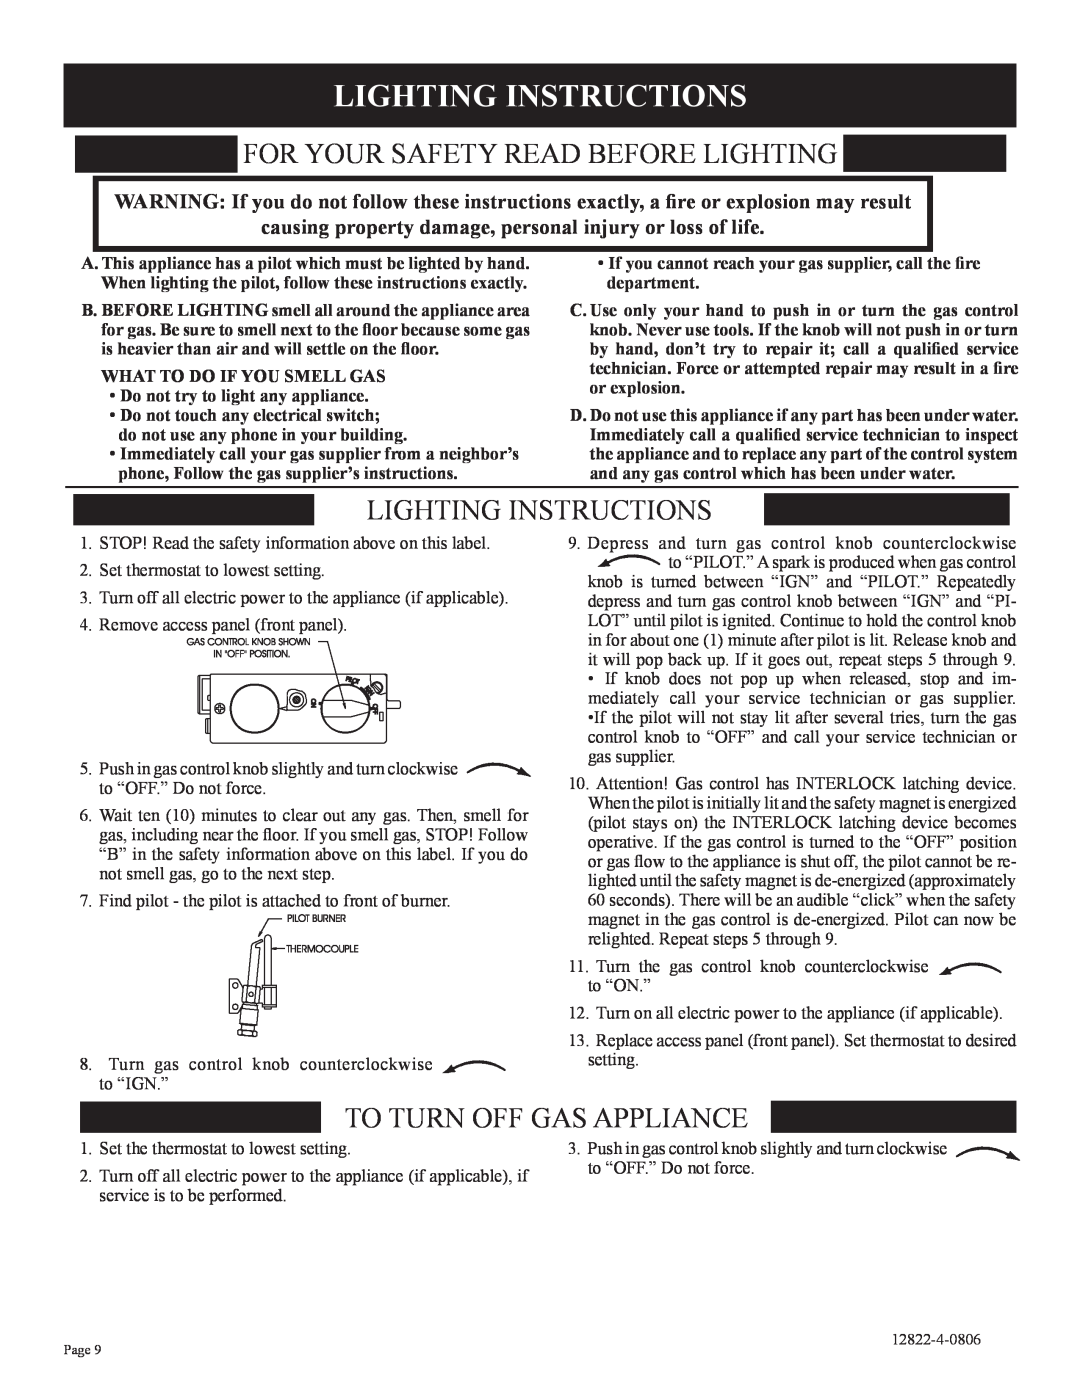 Empire Comfort Systems RH-65-6 Lighting Instructions, For Your Safety Read Before Lighting, To Turn Off Gas Appliance 